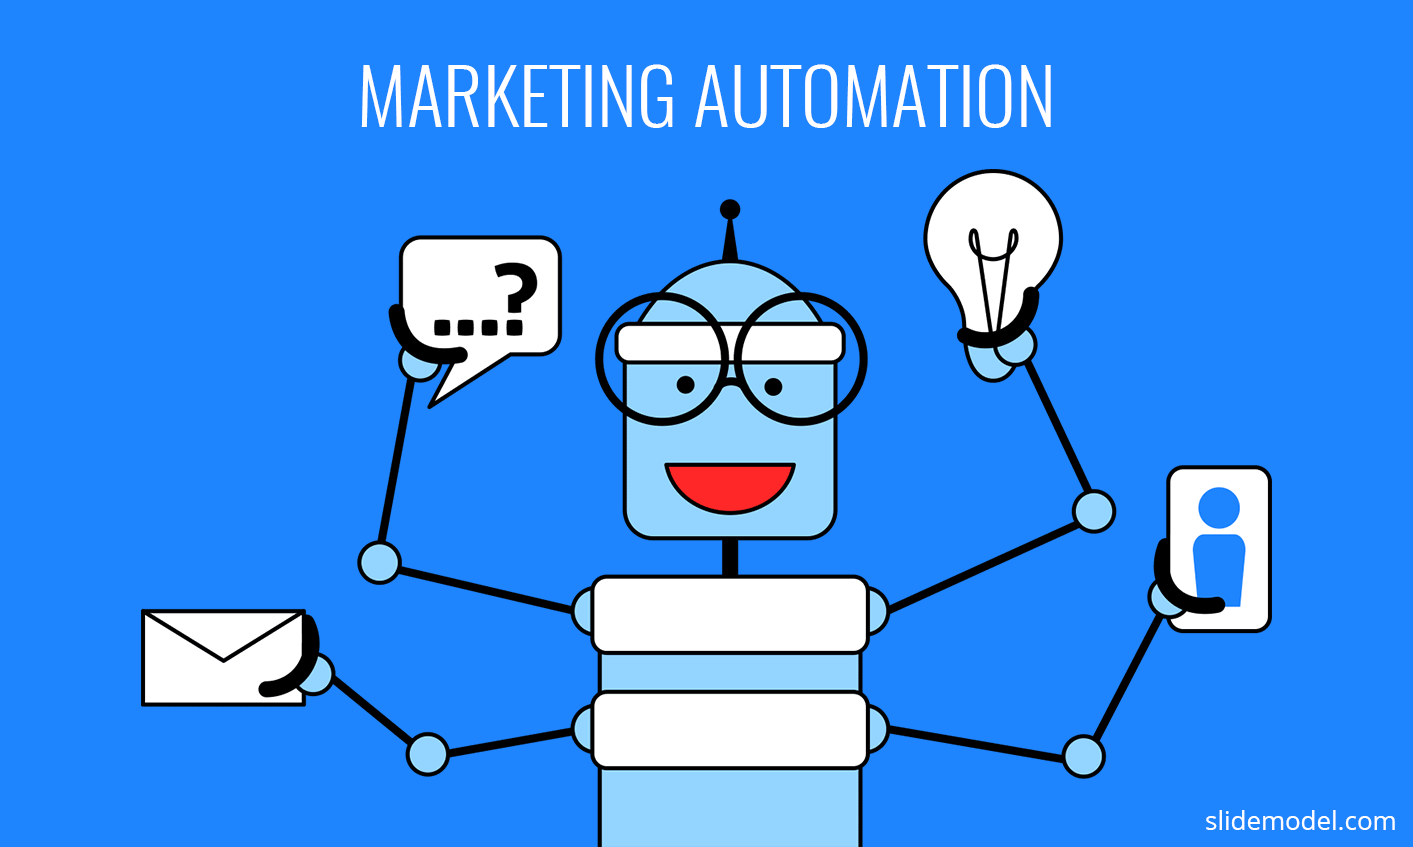 A robot design created as a metaphor of Marketing Automation with blue background